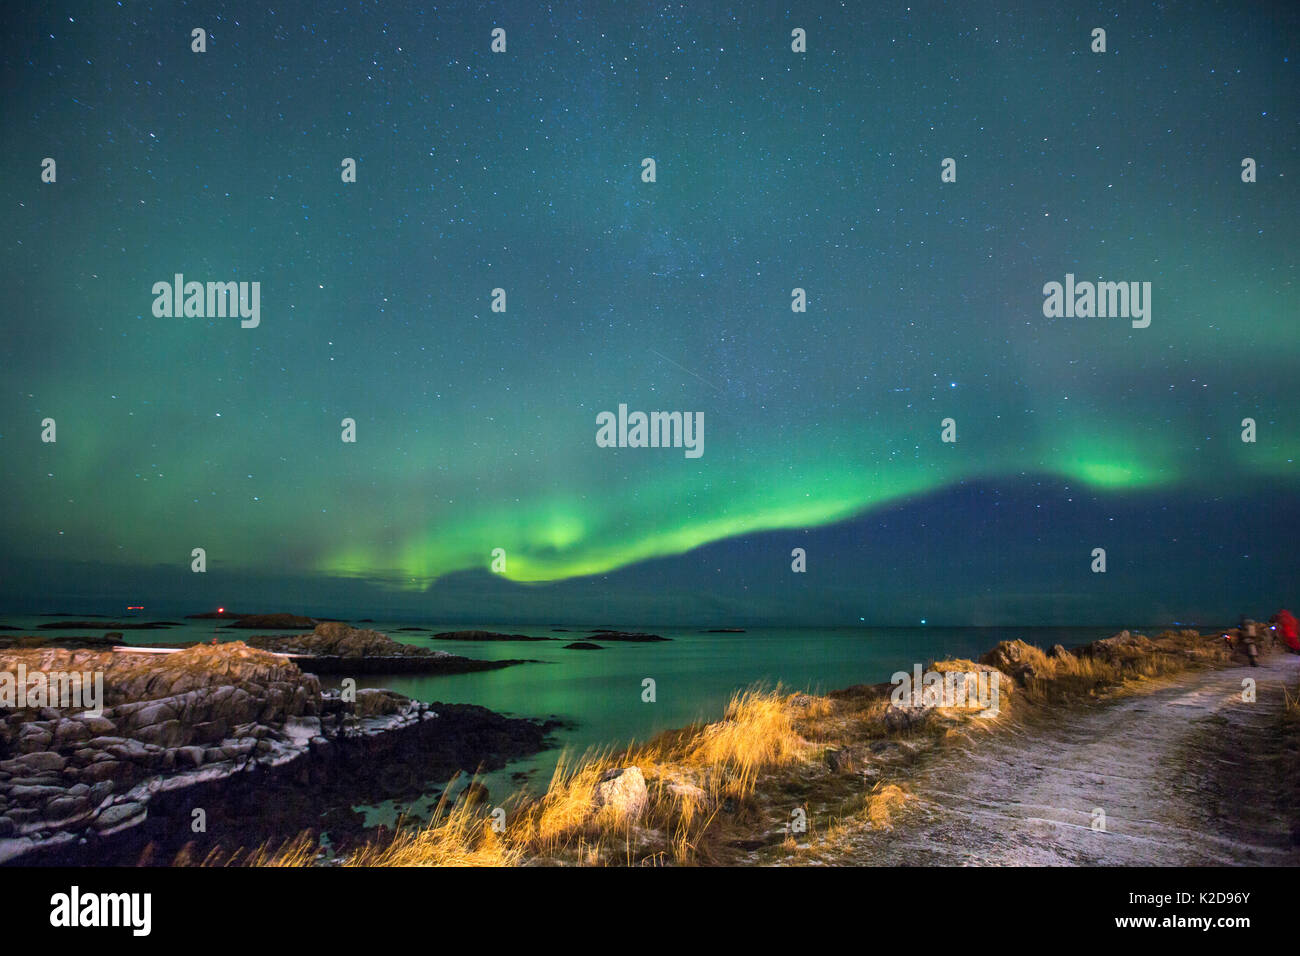 Northern lights showing above coast close to Andenes Lighthouse, Andenes, Andoya island, North Atlantic Ocean, Norway, January 2016 Stock Photo